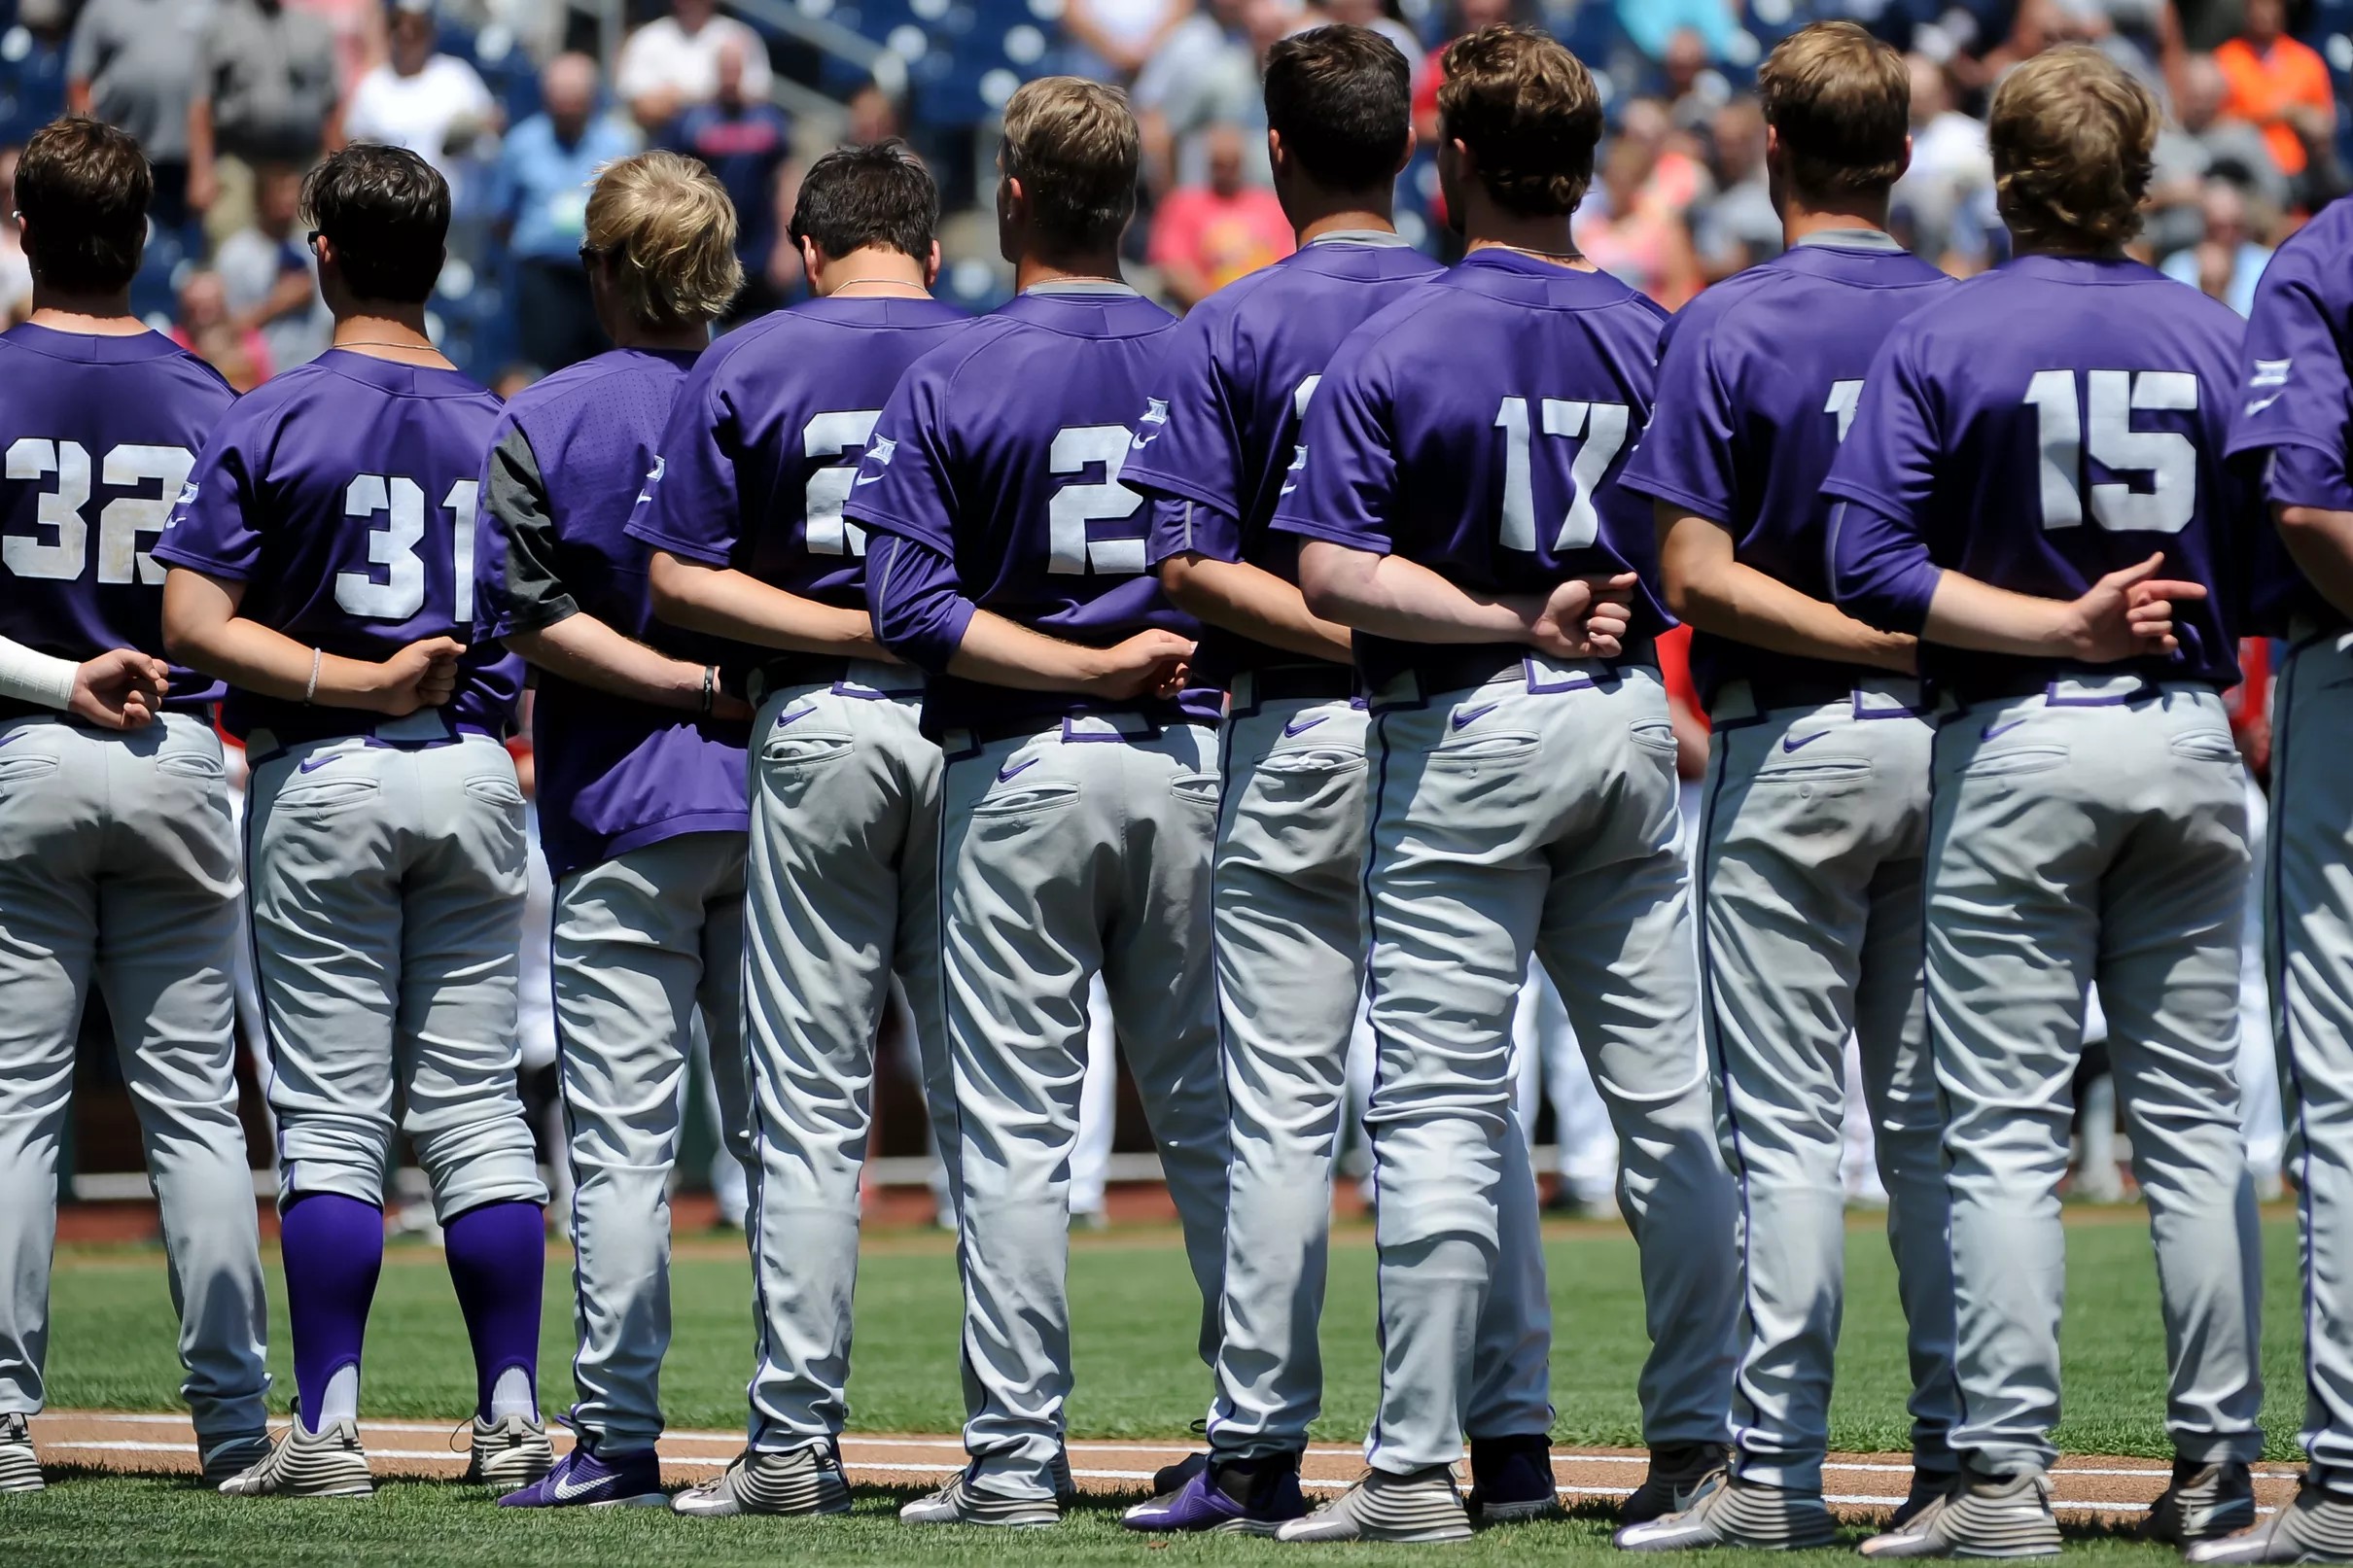 NCAA Baseball Forth Worth Regional The TCU Horned Frogs Preview